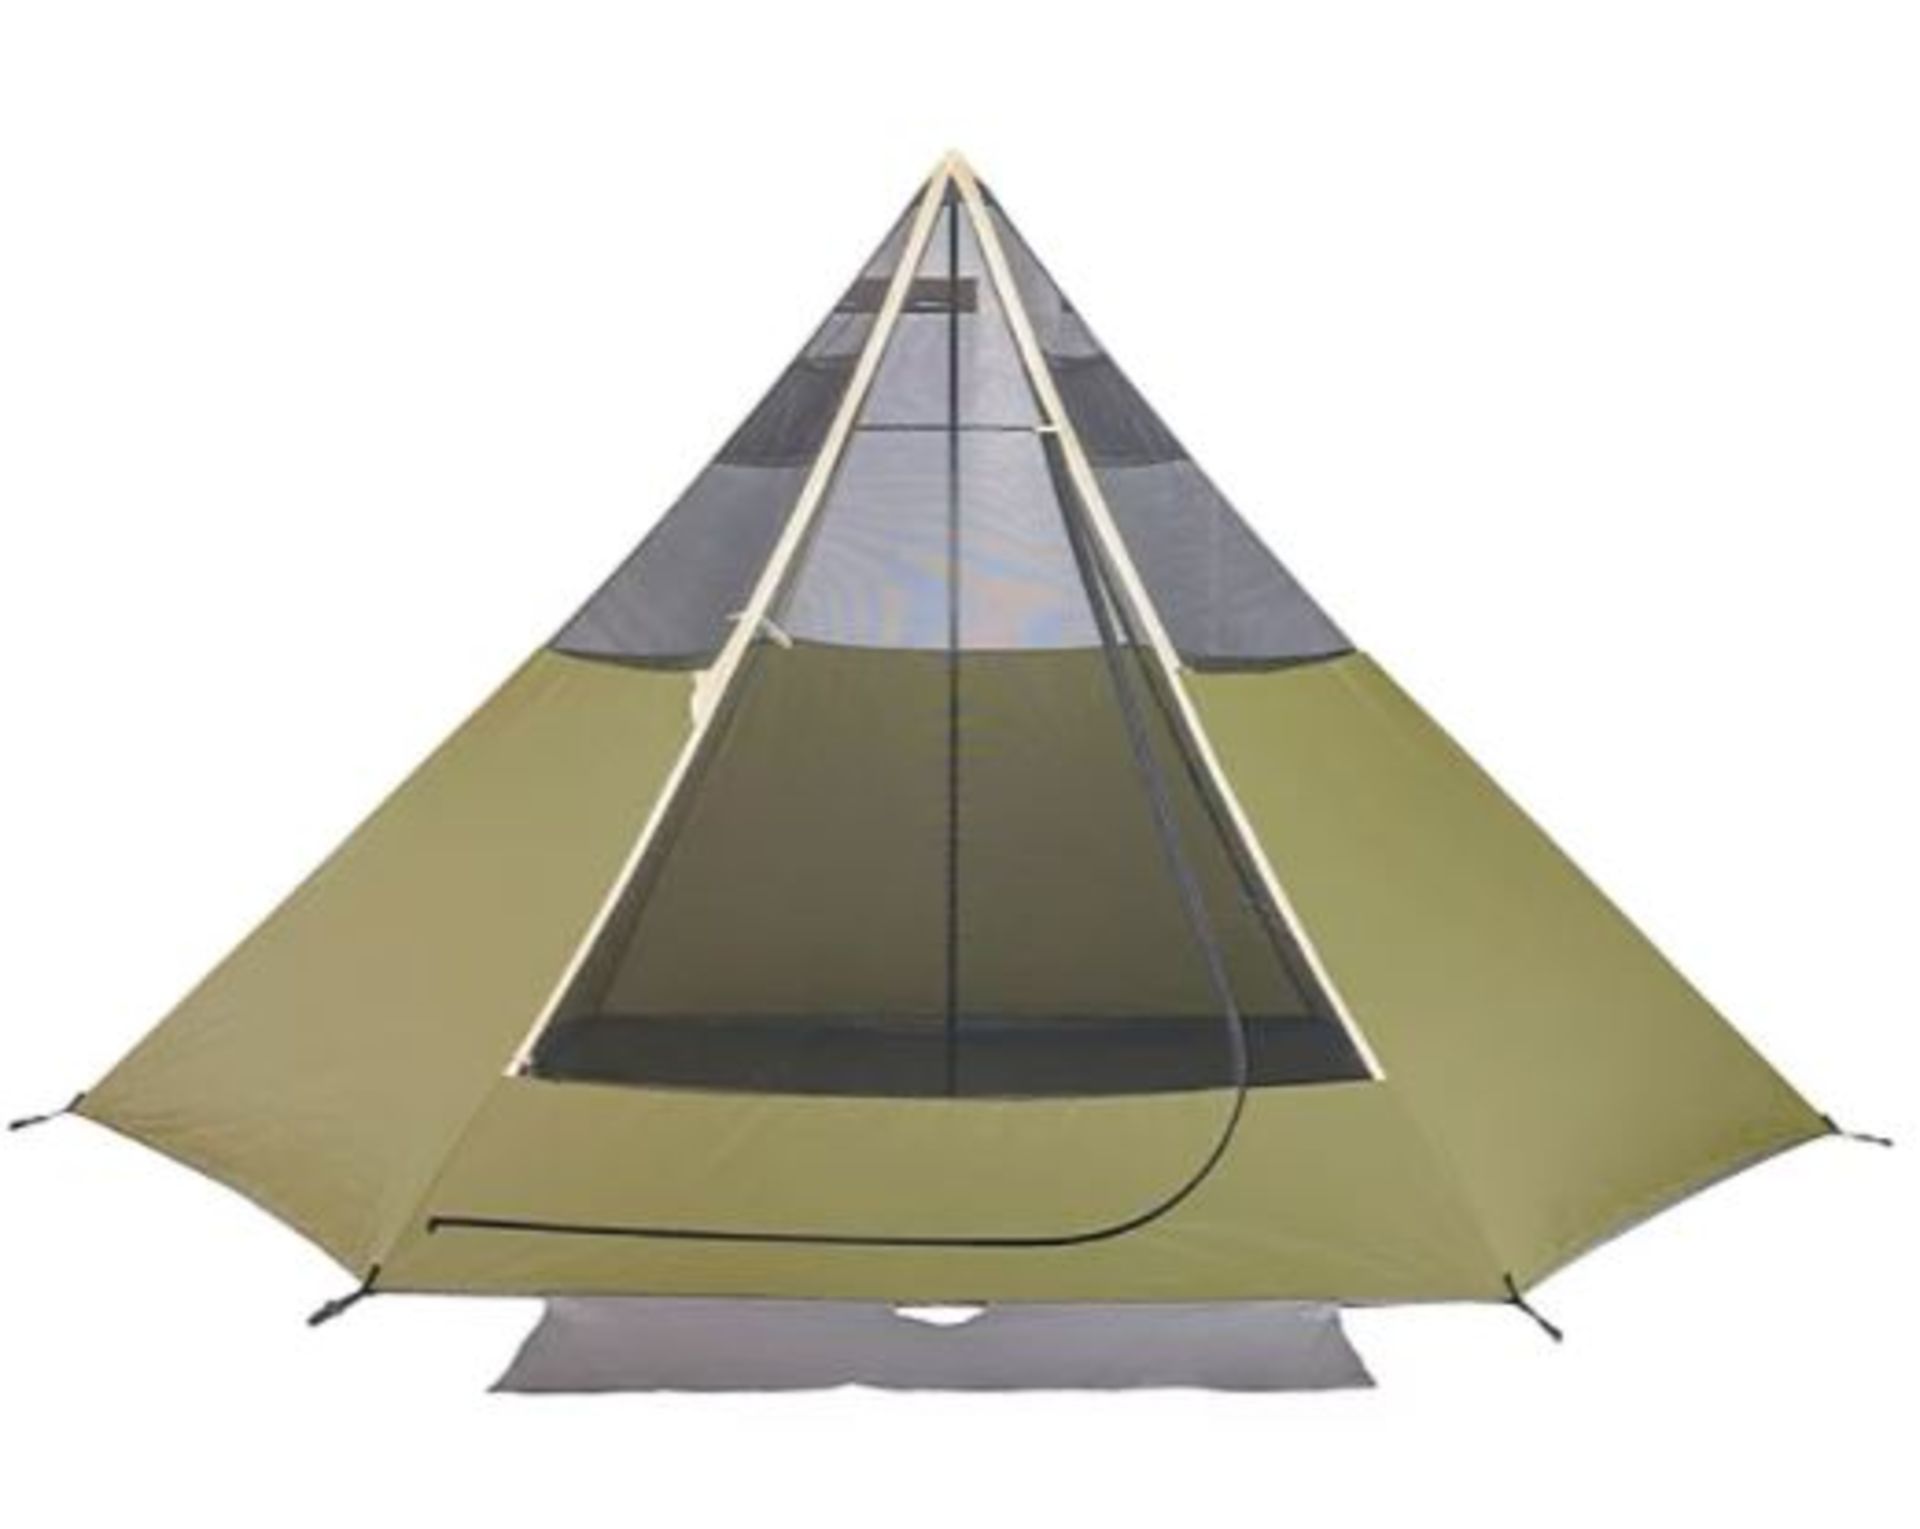 (2K) 1x Ozark Trail 8 Person Teepee Tent RRP £89. (Contents Not Checked). - Image 4 of 5